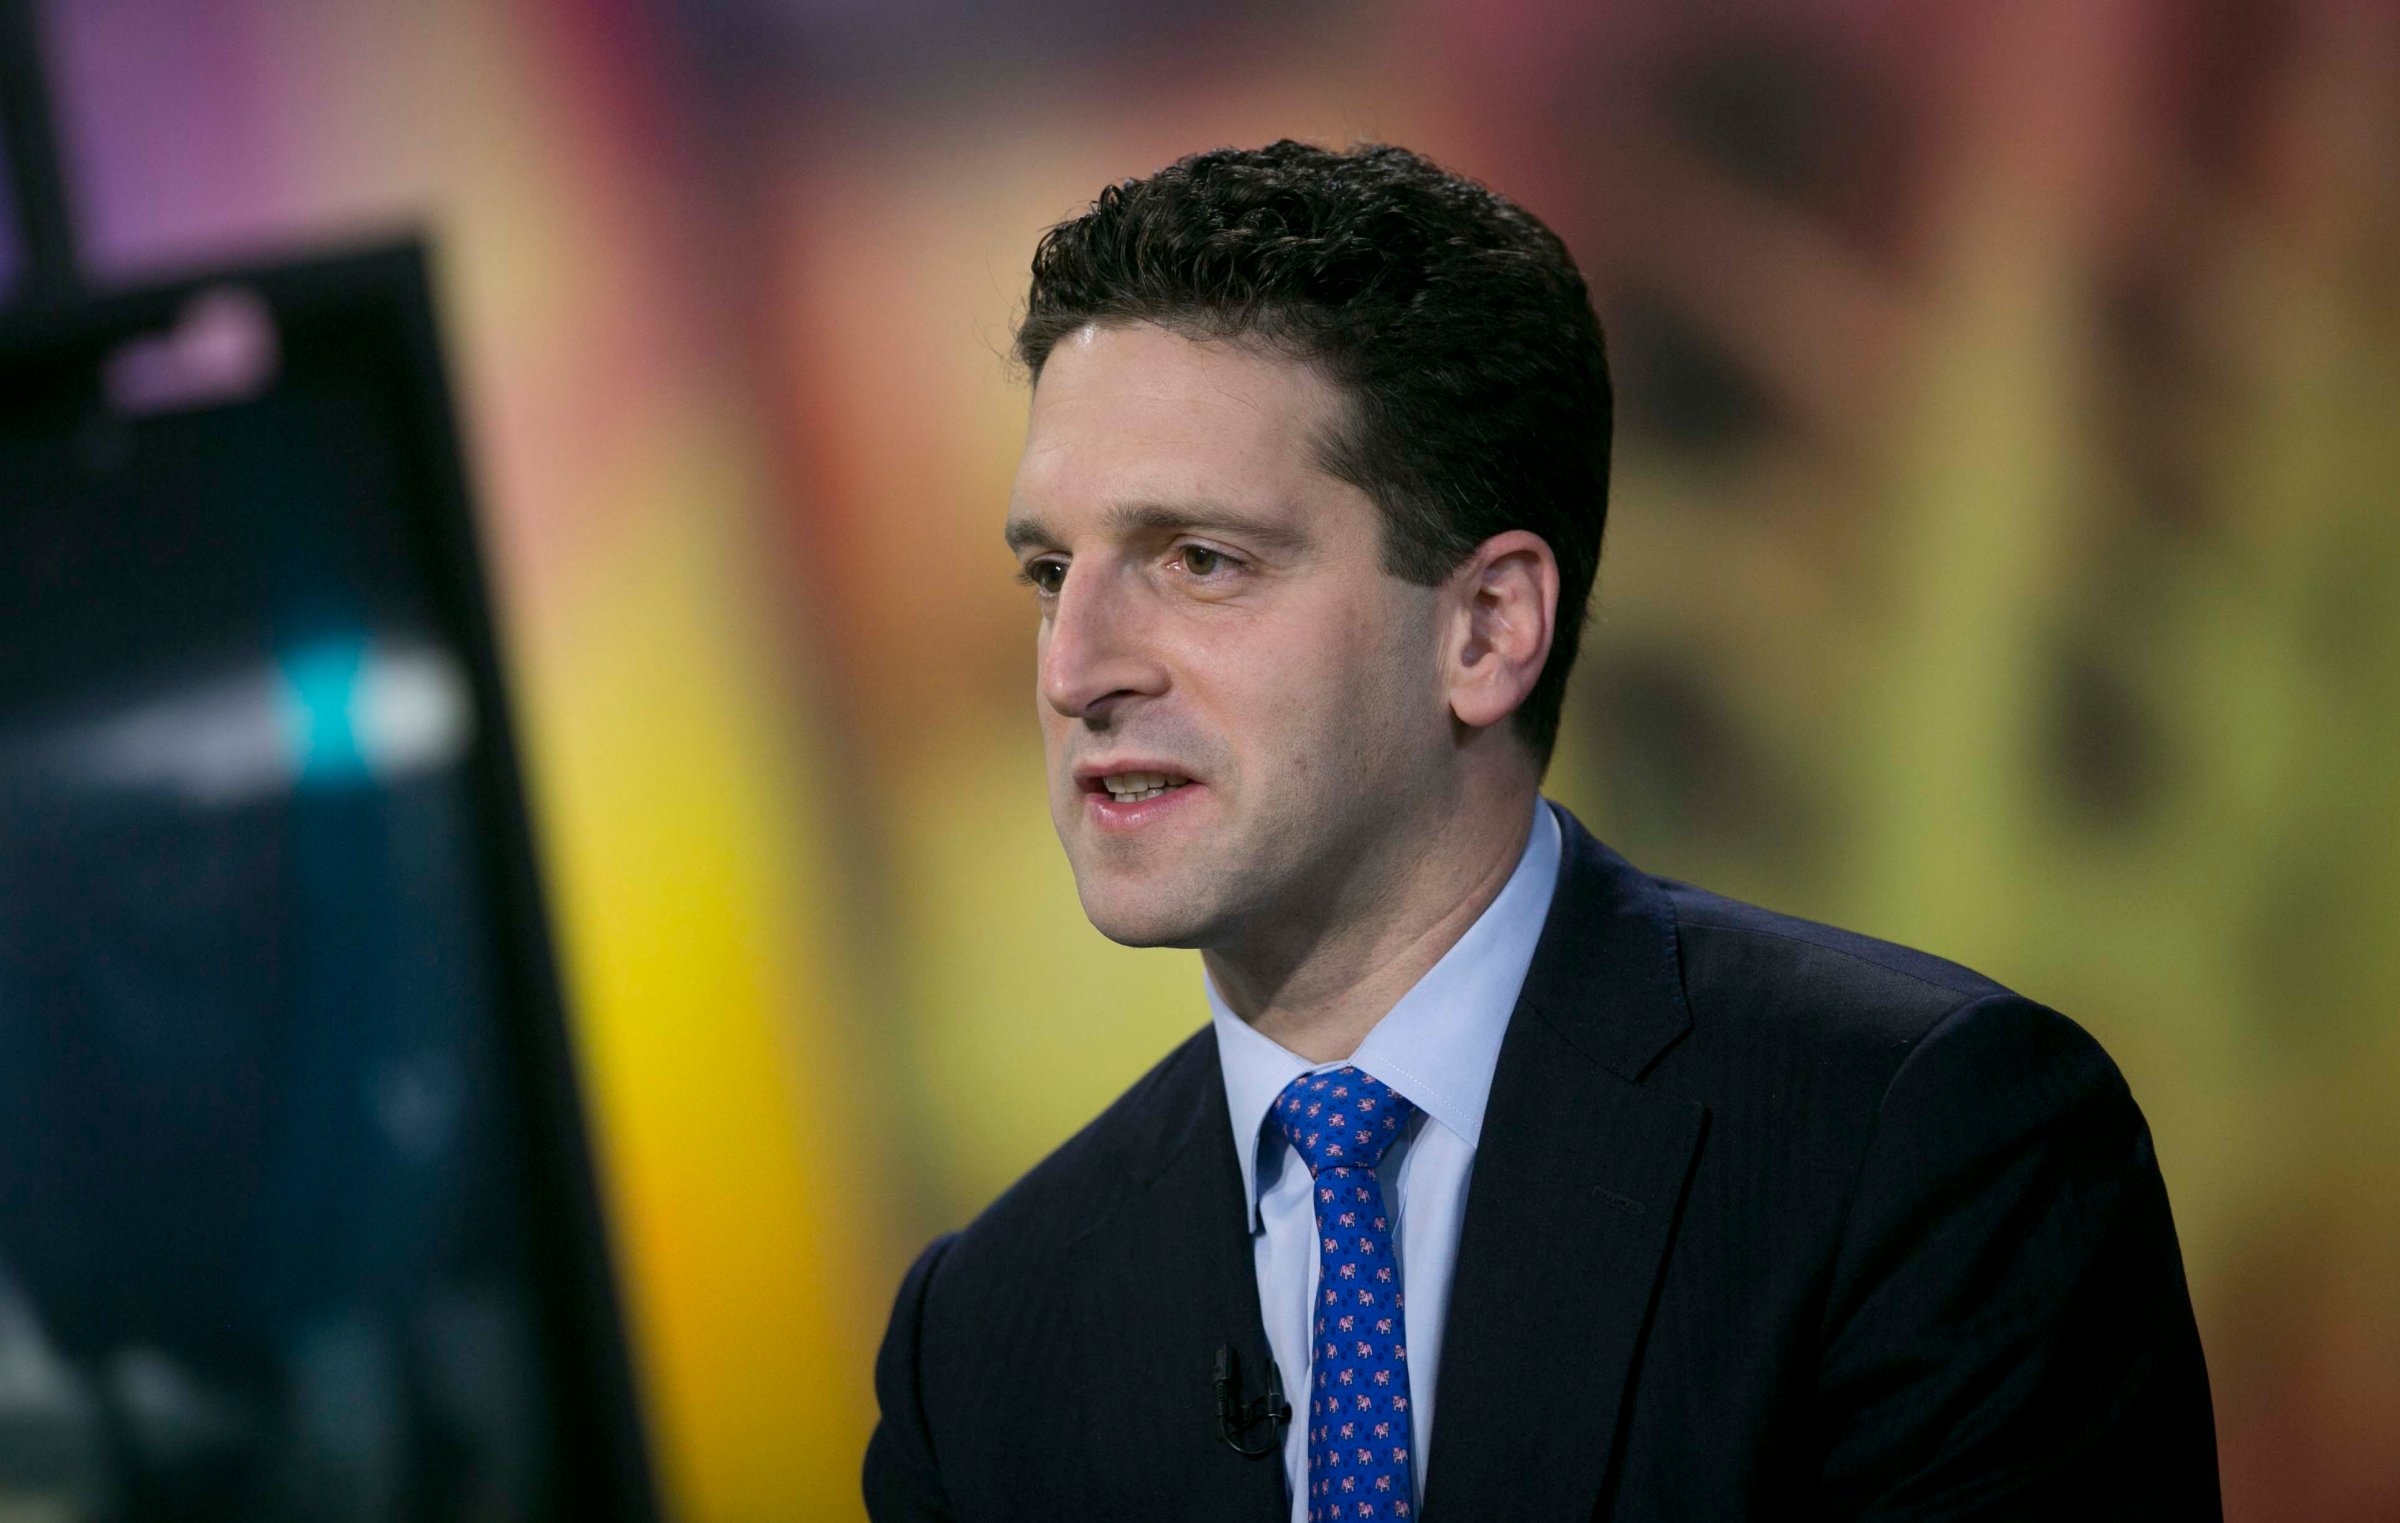 Superintendent of the New York State Department of Financial Services Benjamin Lawsky Interview